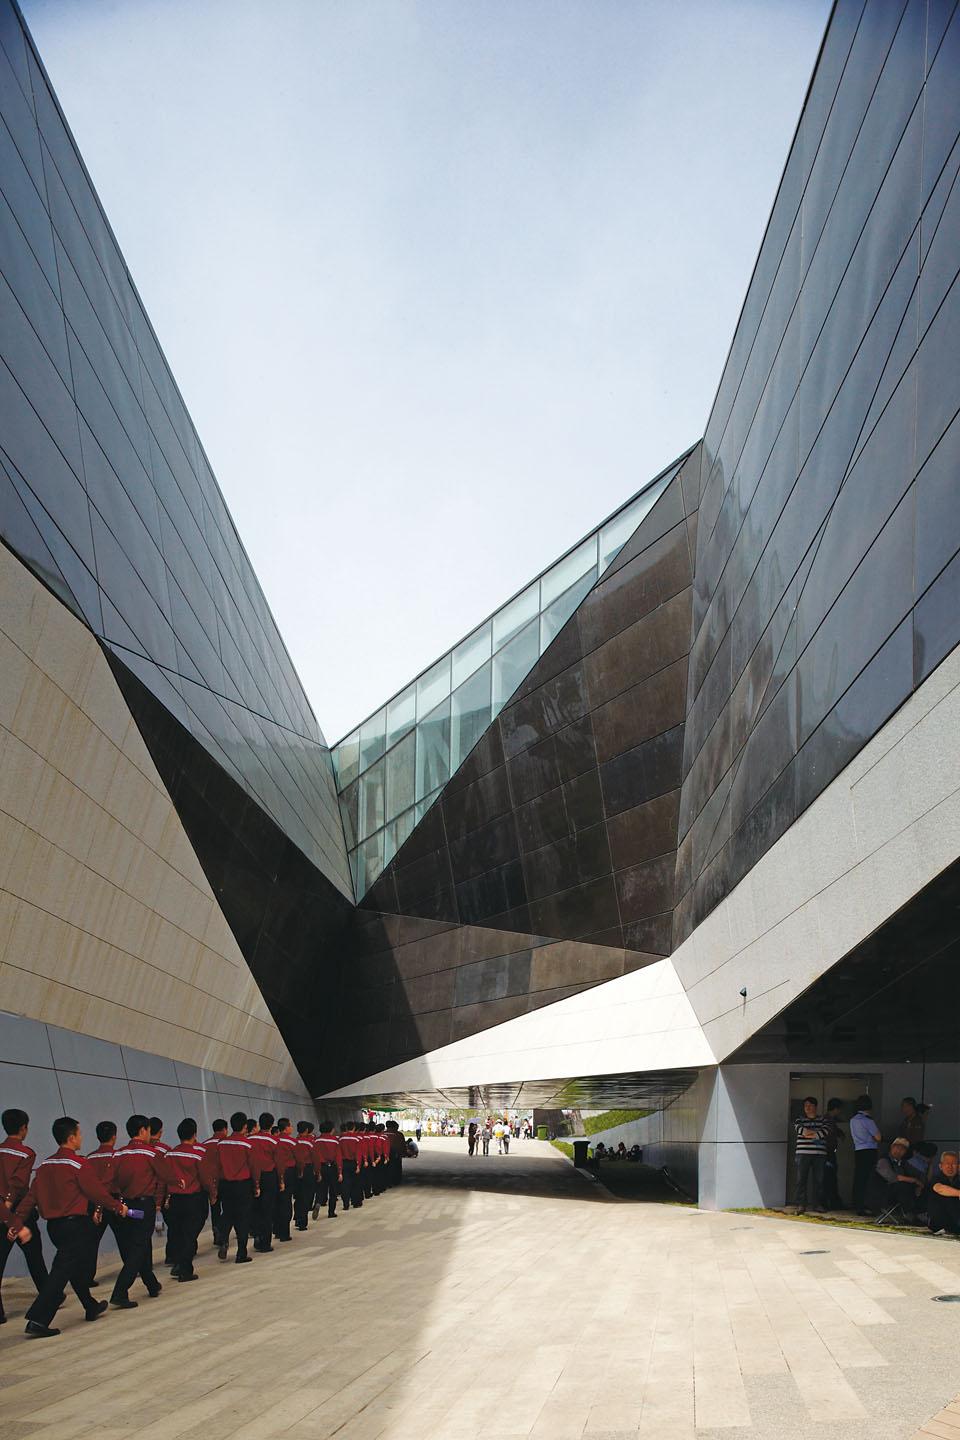 Spacious circulation areas
are created under the blocks
that are characterised by
their sharply folded forms.